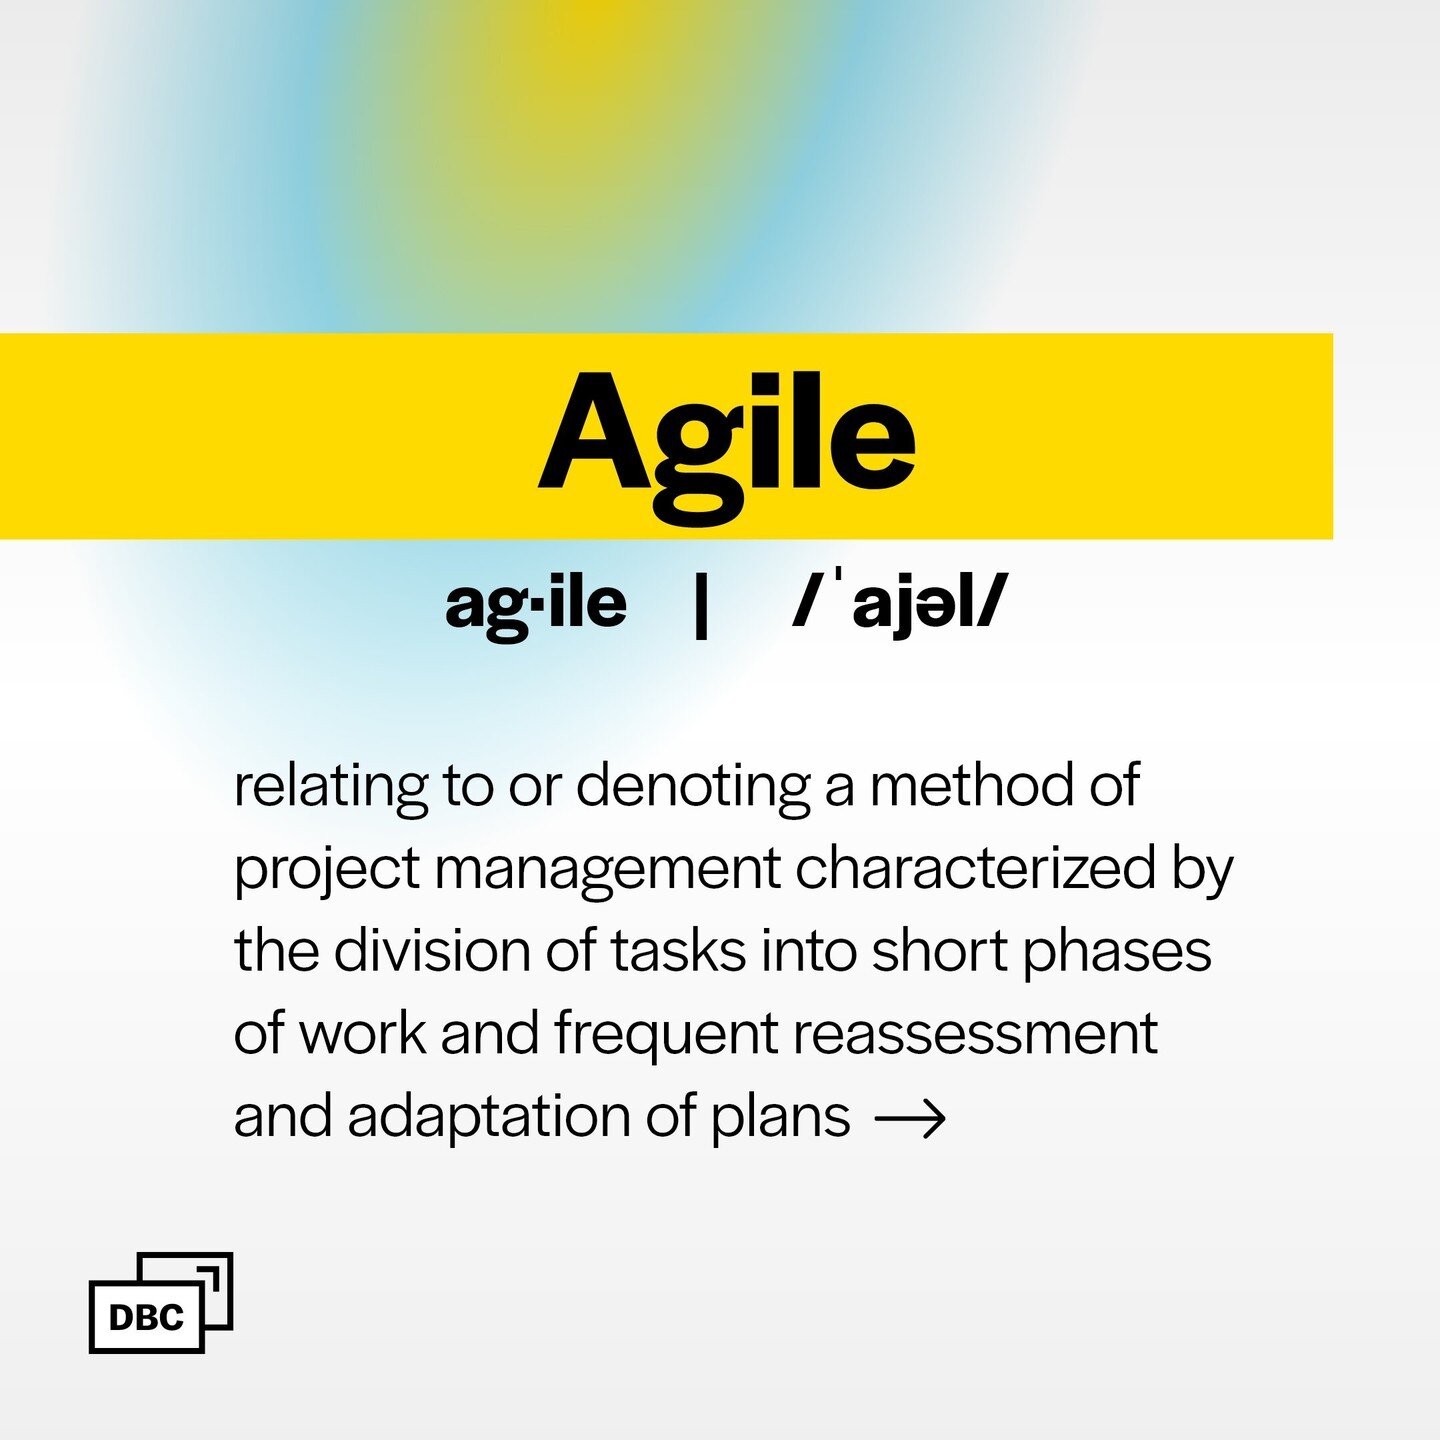 Agile methodology is everywhere now. 
It moved from dev/tech to marketing, and now almost any other project team. The benefits are plentiful &mdash; faster ROI, lower risk, and ability to test and fail are among the highest advantages.

Regardless, b